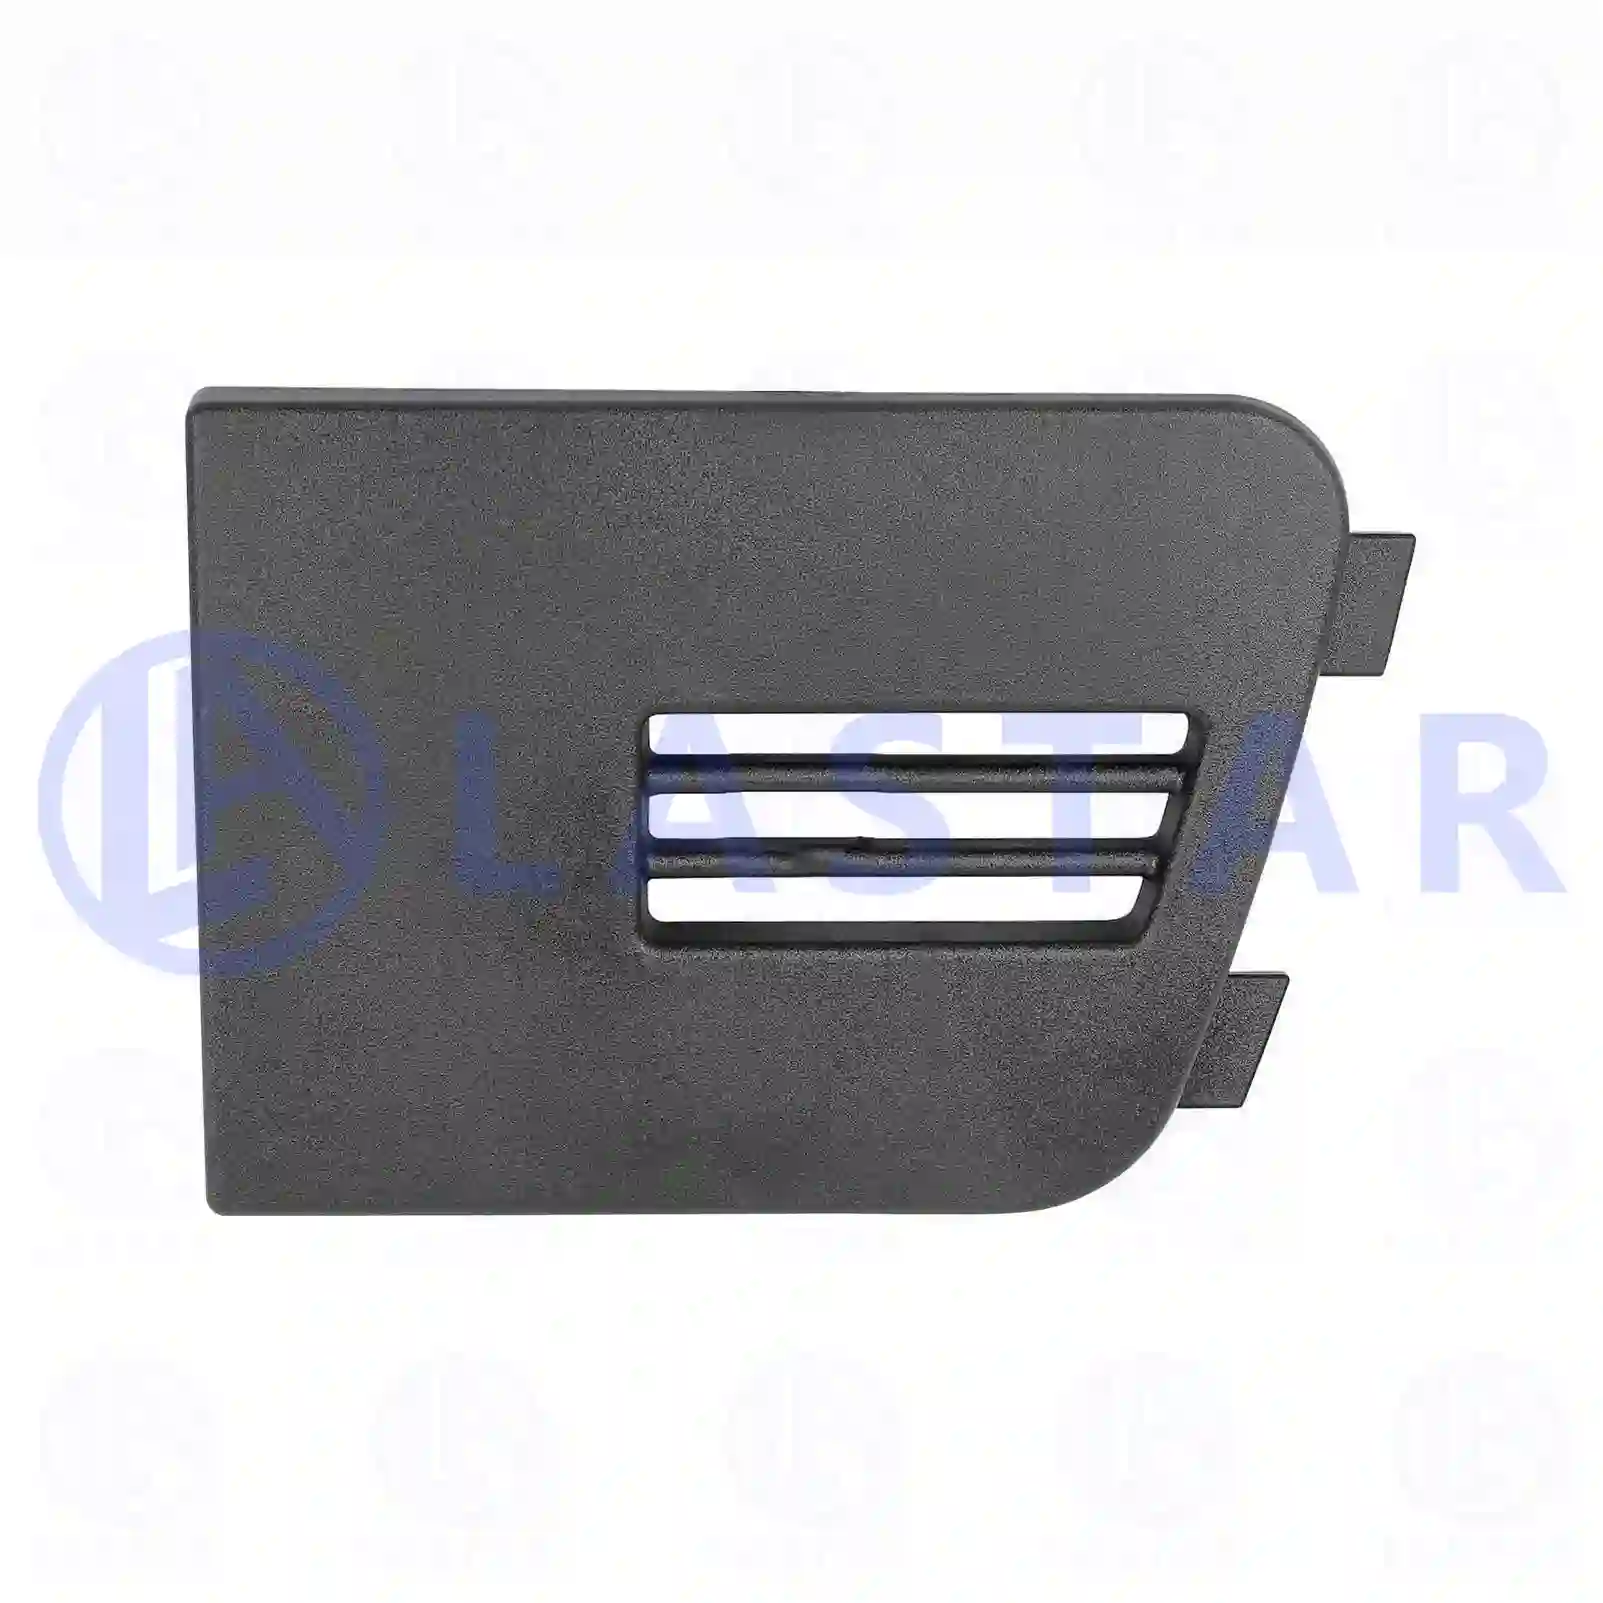 Cover, front grill, left, 77721084, 20529705, 3175545, ZG60454-0008 ||  77721084 Lastar Spare Part | Truck Spare Parts, Auotomotive Spare Parts Cover, front grill, left, 77721084, 20529705, 3175545, ZG60454-0008 ||  77721084 Lastar Spare Part | Truck Spare Parts, Auotomotive Spare Parts